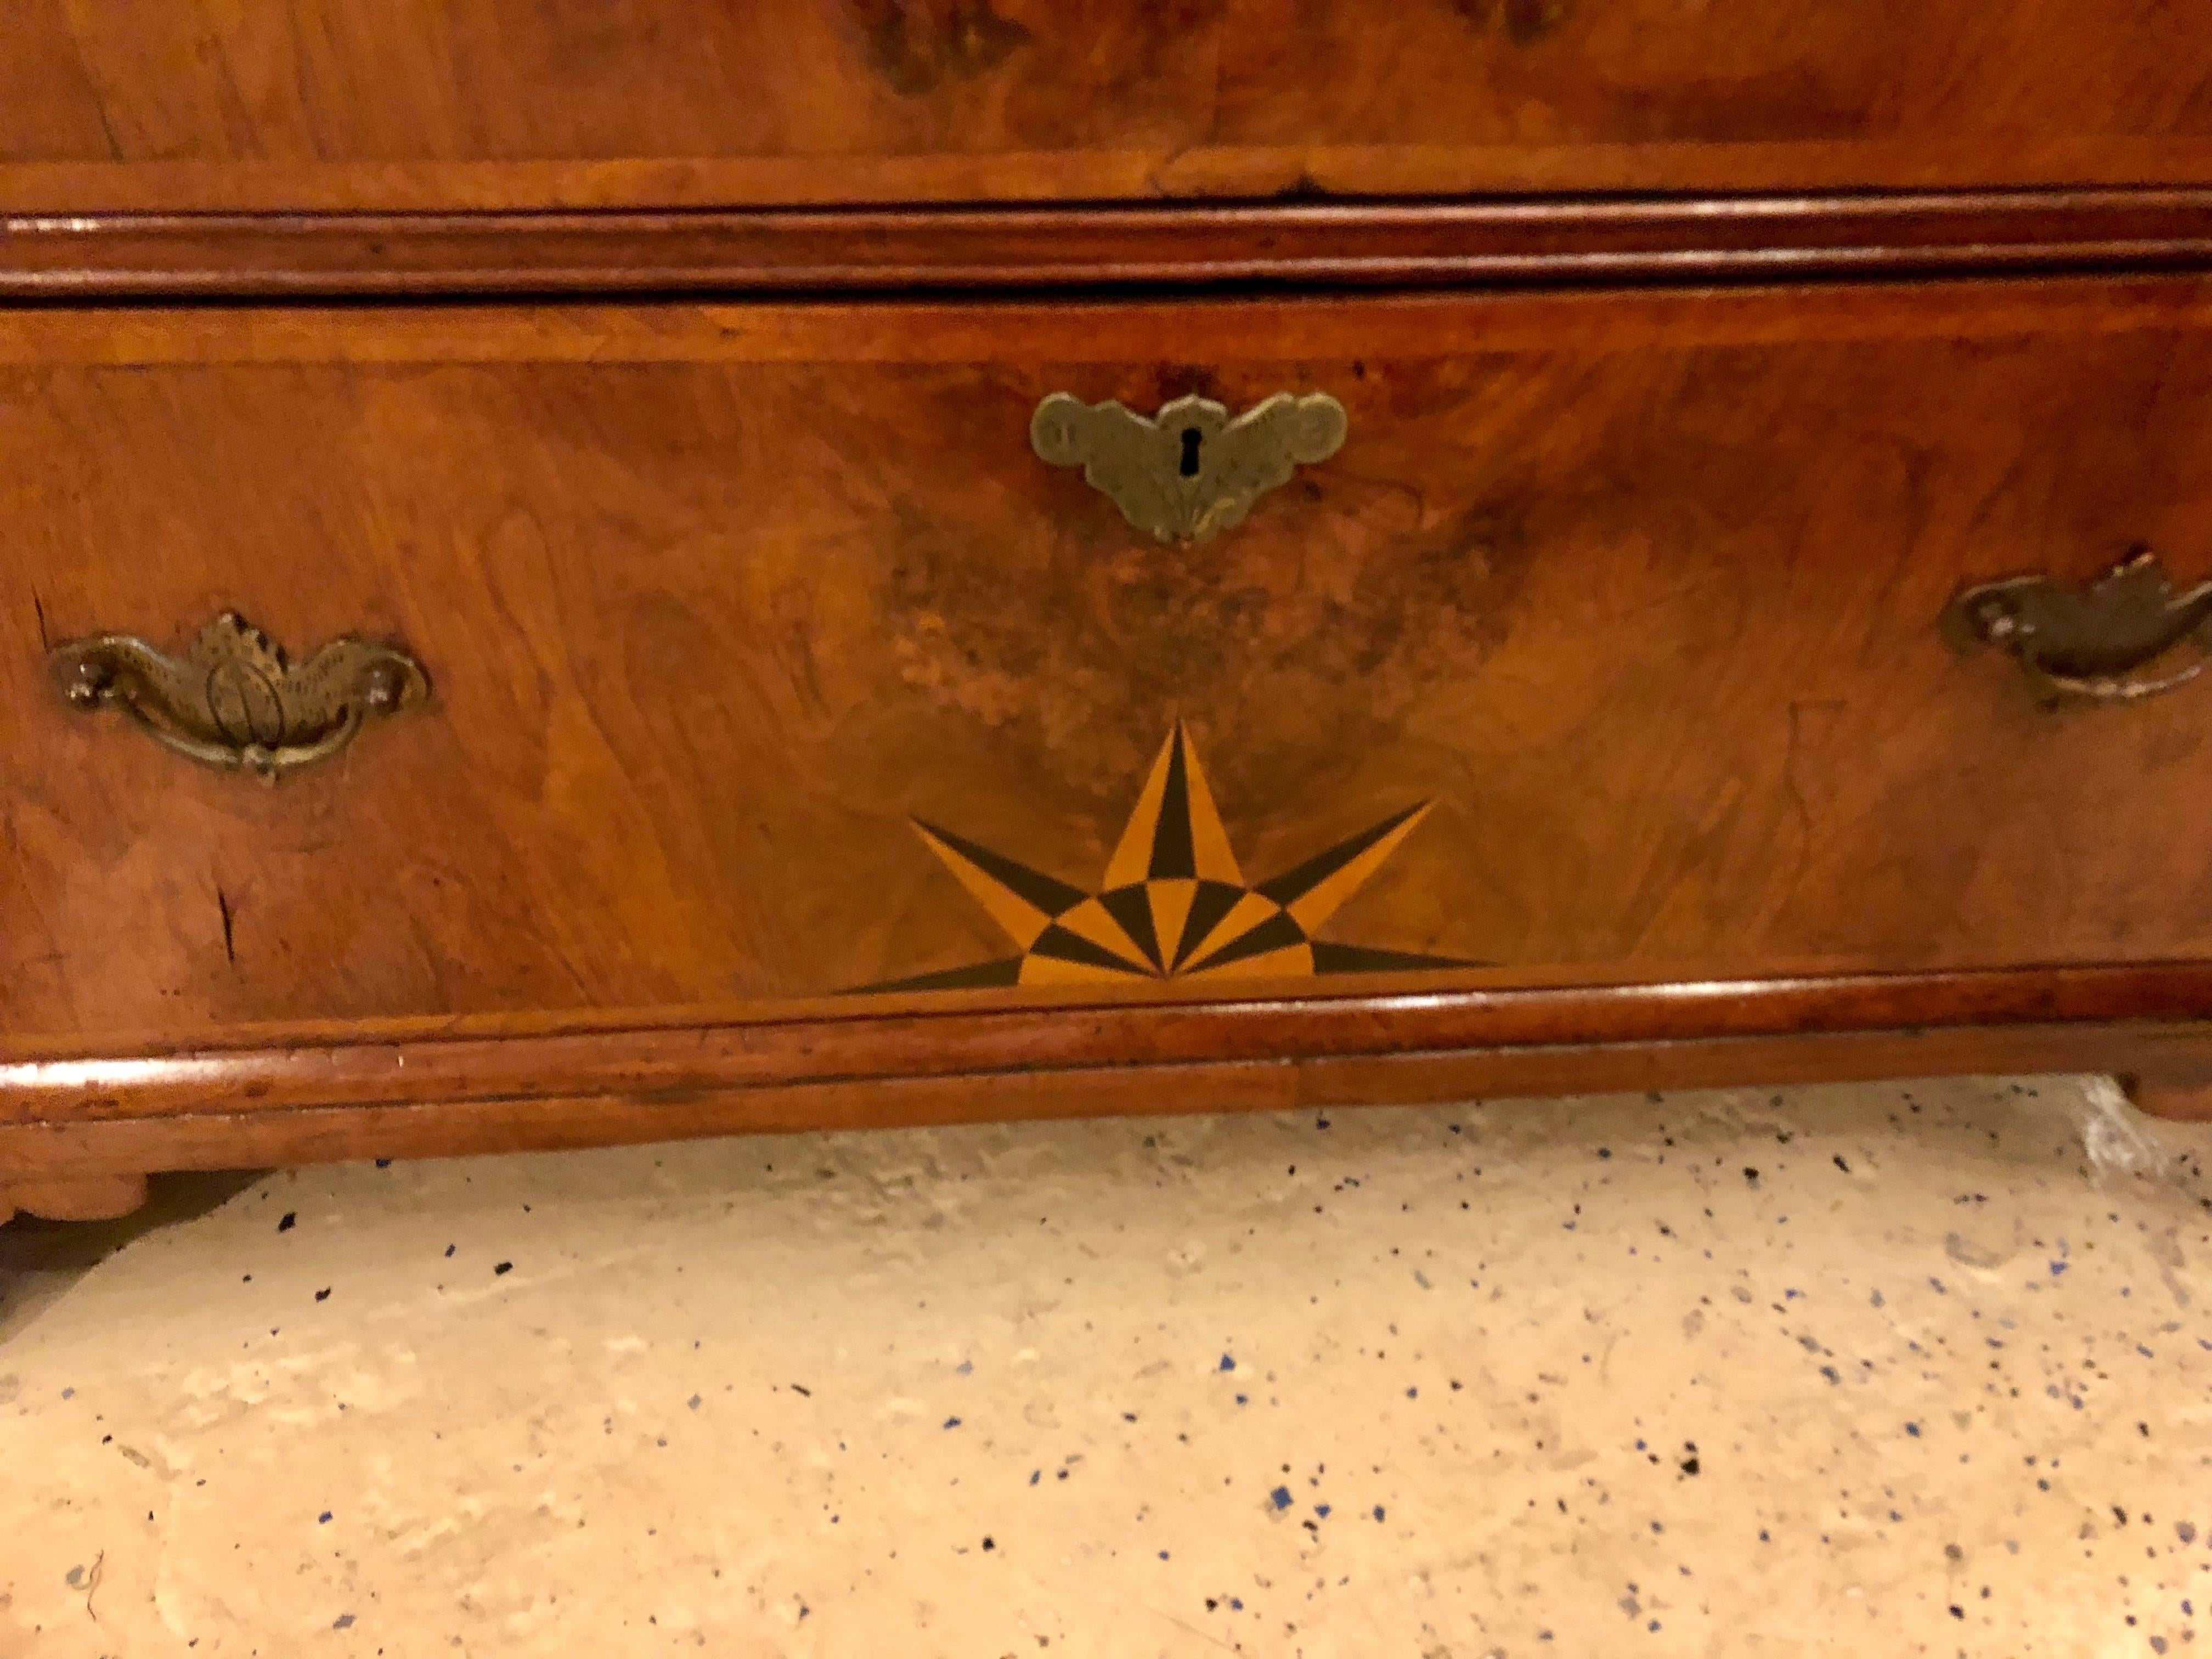 An 18 century German chest of drawers or commode. A fine German period commode with spectacular inlays on the top and lower drawer bearing a starburst design. Having its original bracket feet this is surely a prize for any true antique collector.